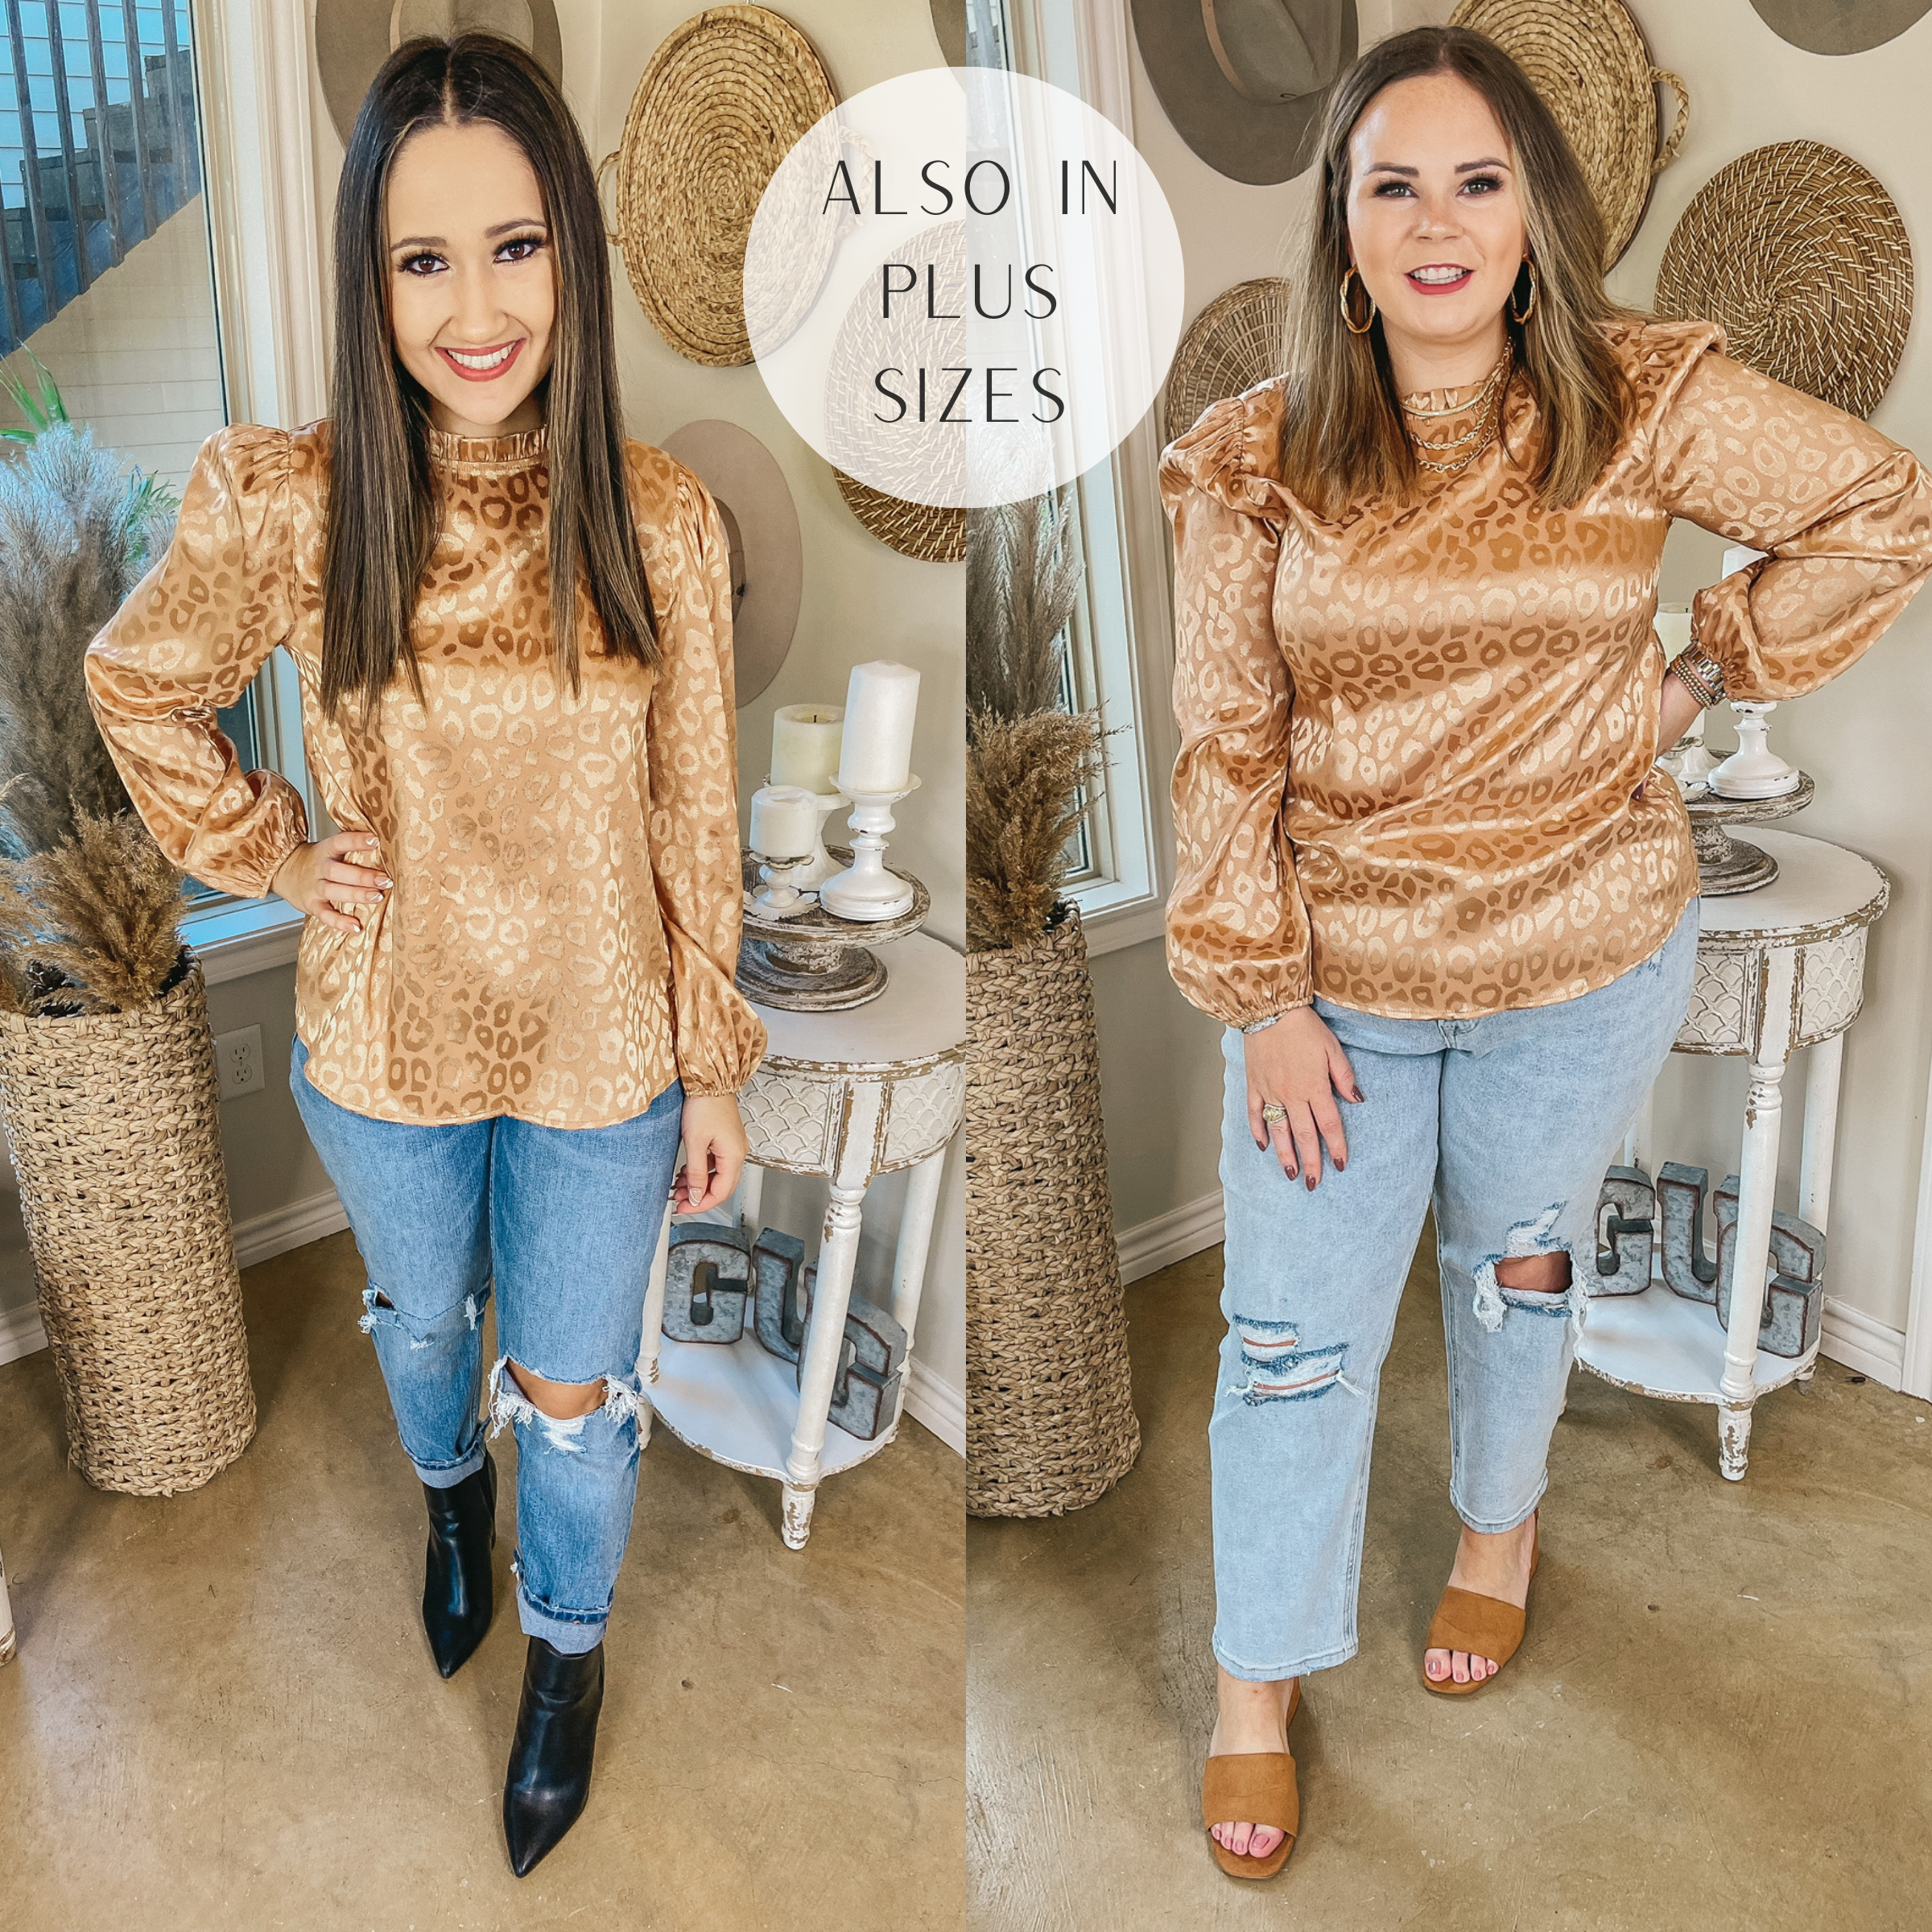 Styled in Shine Satin Leopard Print Long Sleeve Blouse in Copper - Giddy Up Glamour Boutique